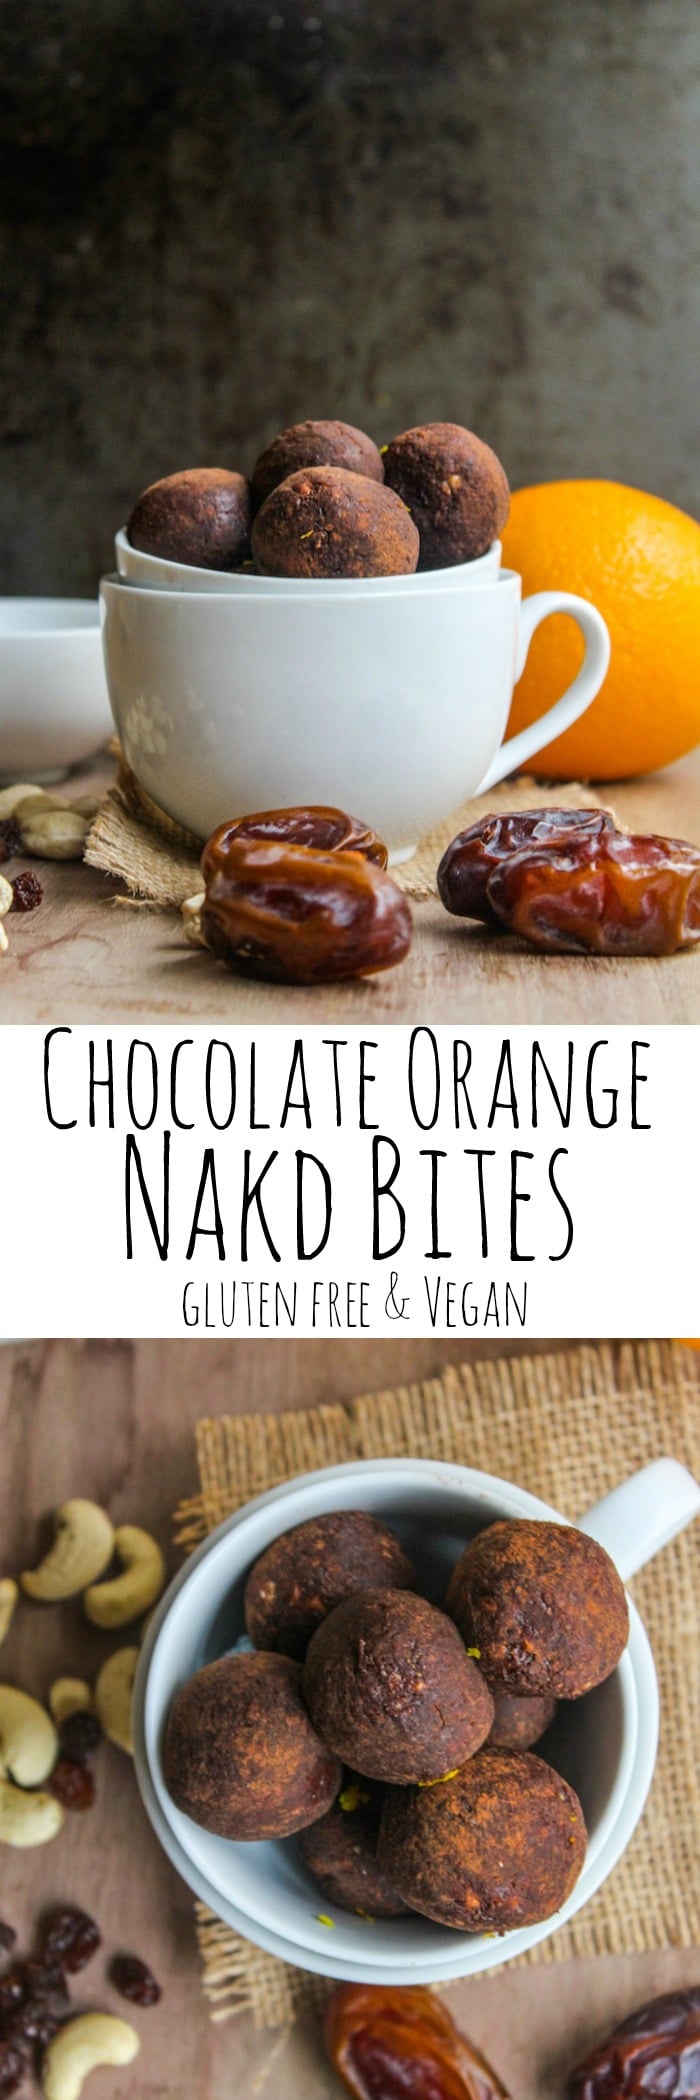 Homemade chocolate orange nakd bites made with just five ingredients – dates, raisins, cashews, cocoa, and a touch of orange zest. 